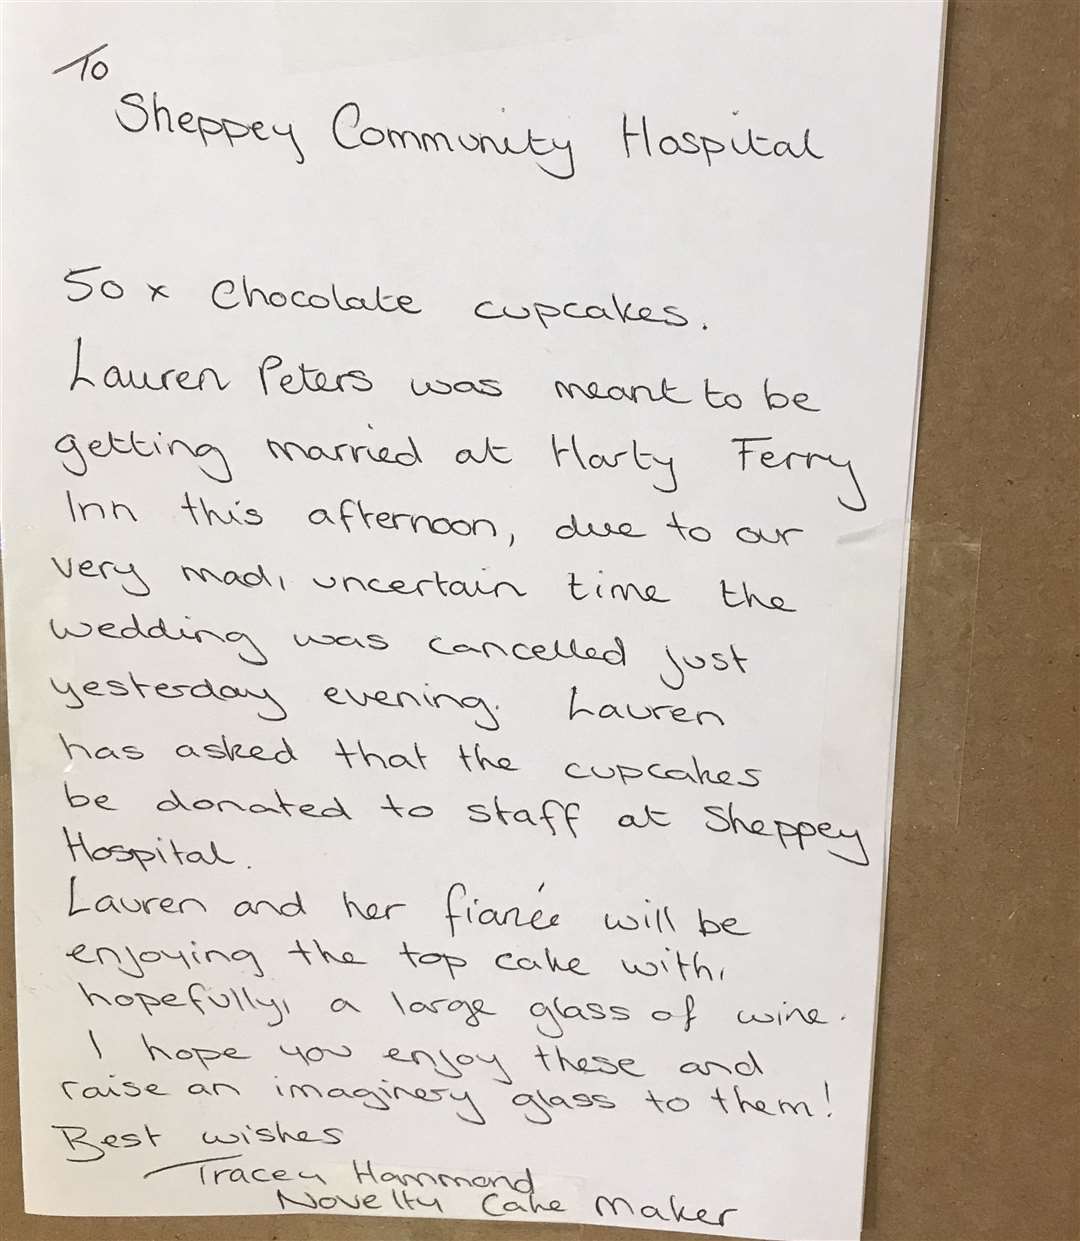 Cake maker Tracey Hammond dropped off the cupcakes at Sheppey Community Hospital this morning with a note